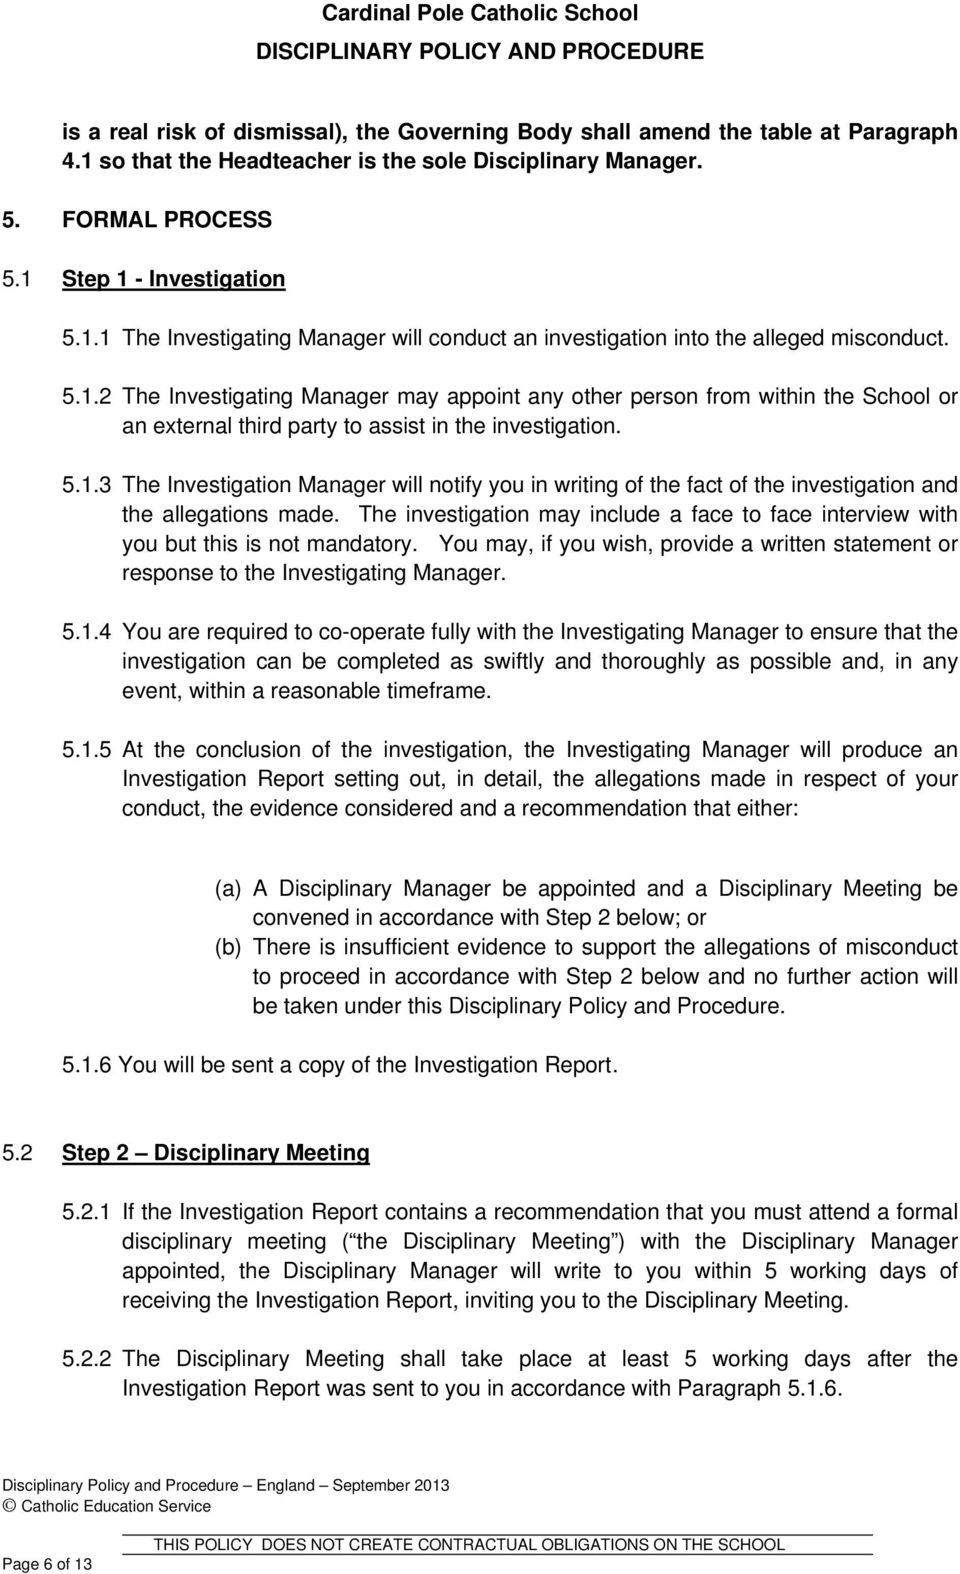 The investigation may include a face to face interview with you but this is not mandatory. You may, if you wish, provide a written statement or response to the Investigating Manager. 5.1.